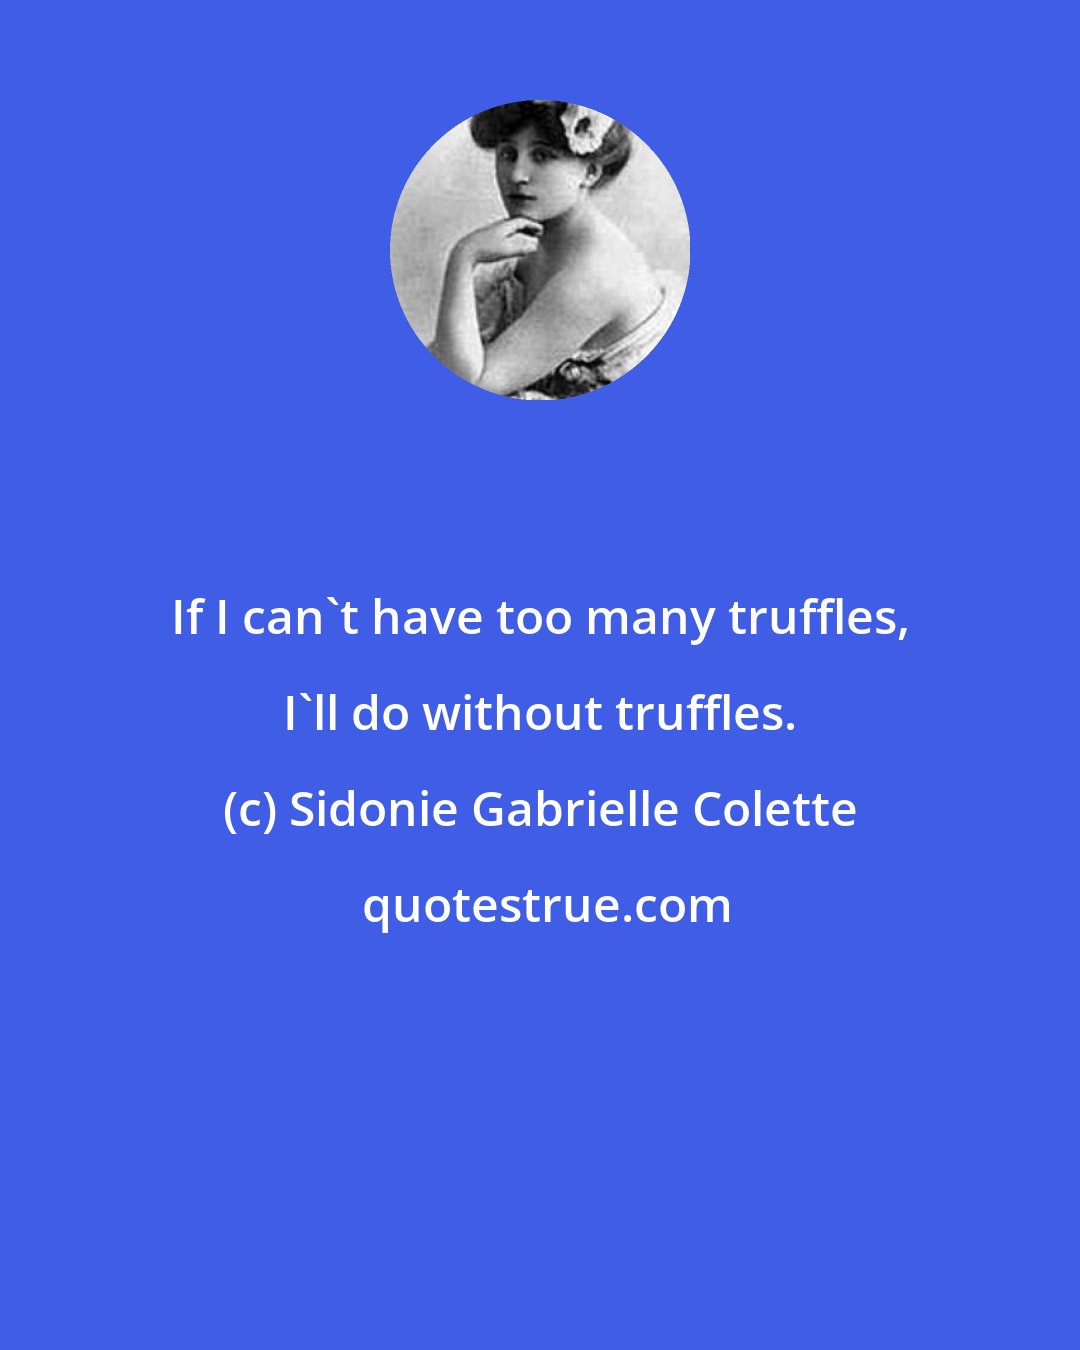 Sidonie Gabrielle Colette: If I can't have too many truffles, I'll do without truffles.